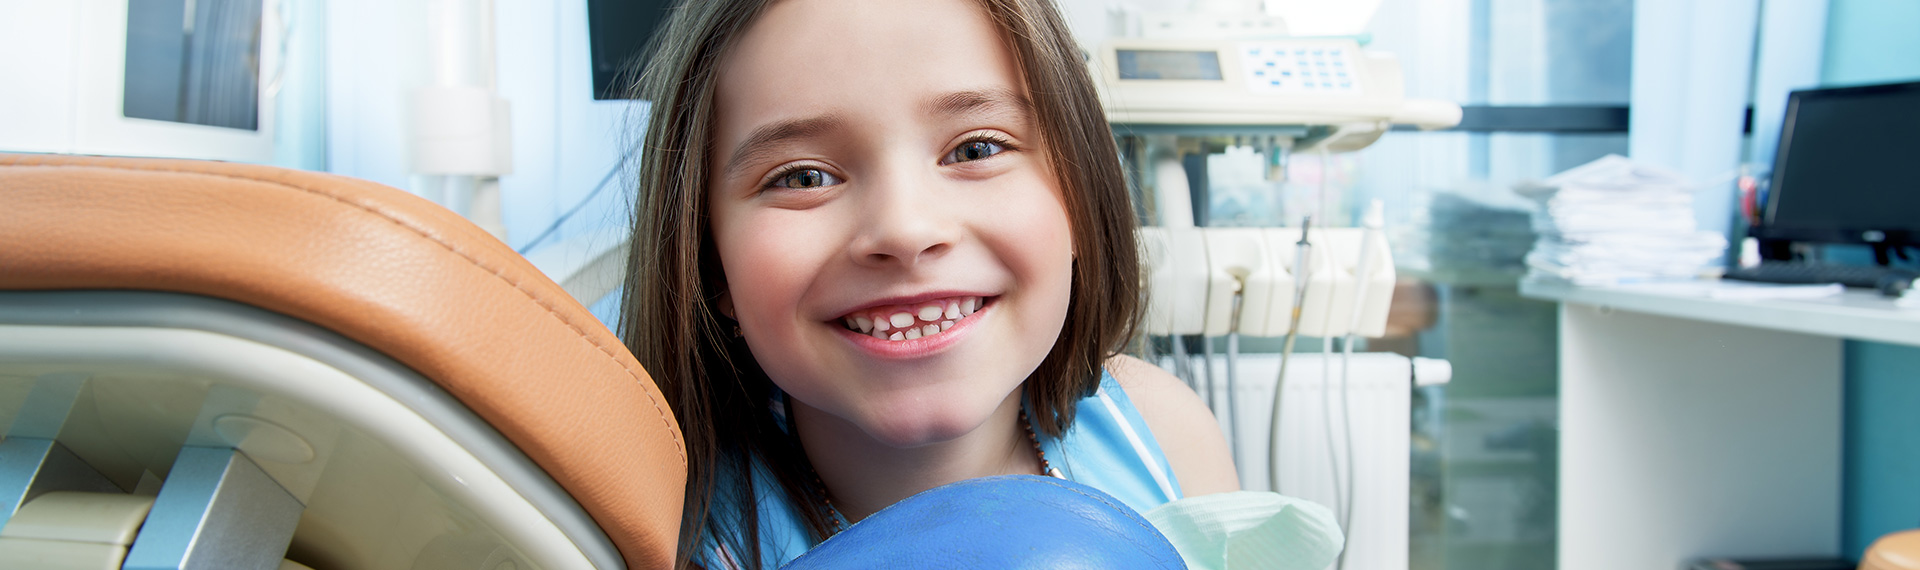 Tooth Fillings for Children Near Me In, Hamilton Ontario Area